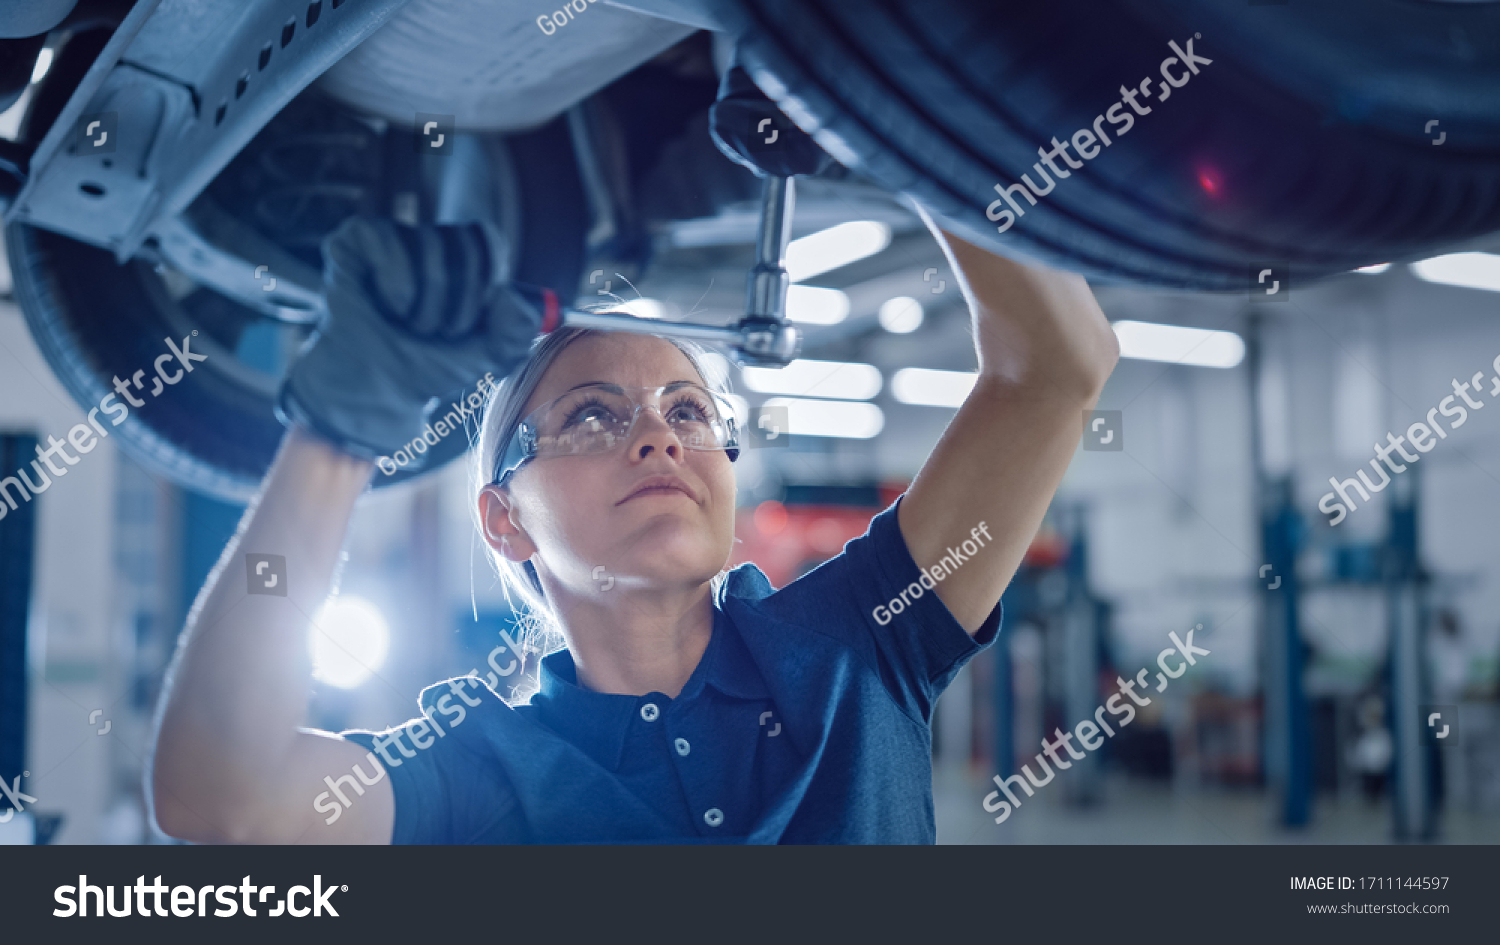 Portrait Shot of a Female Mechanic Working Under Vehicle in a Car Service. Empowering Woman Wearing Gloves and Using a Ratchet Underneath the Car. Modern Clean Workshop. #1711144597